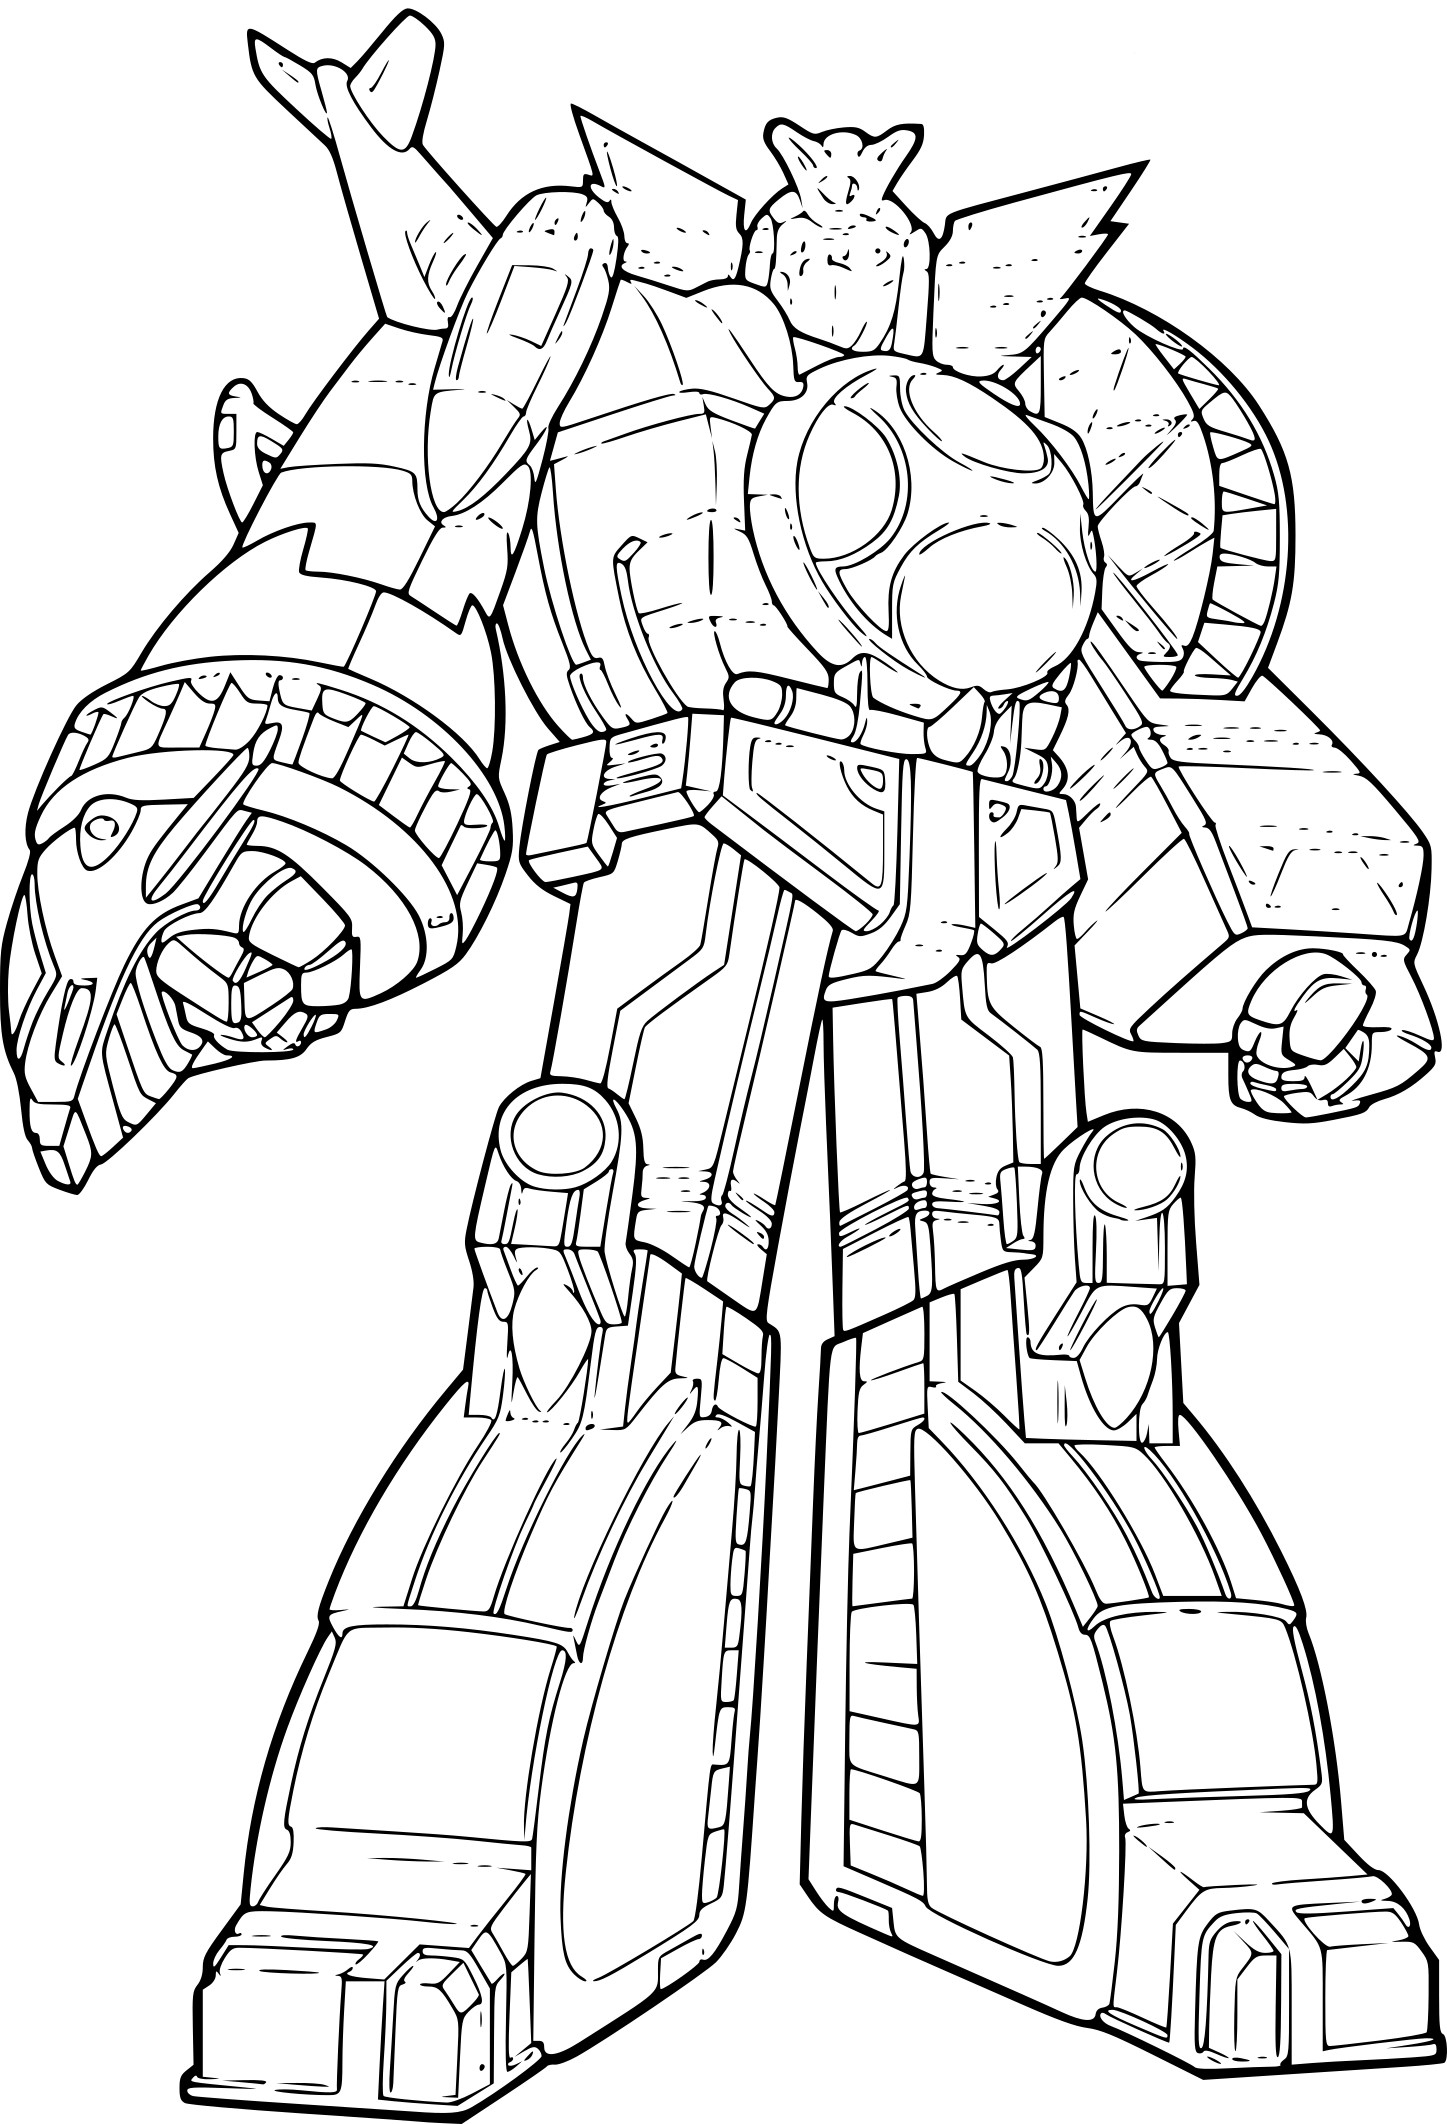 Power Ranger Fury Coloriage - Imagesee concernant Dessin Power Rangers Dino Fury